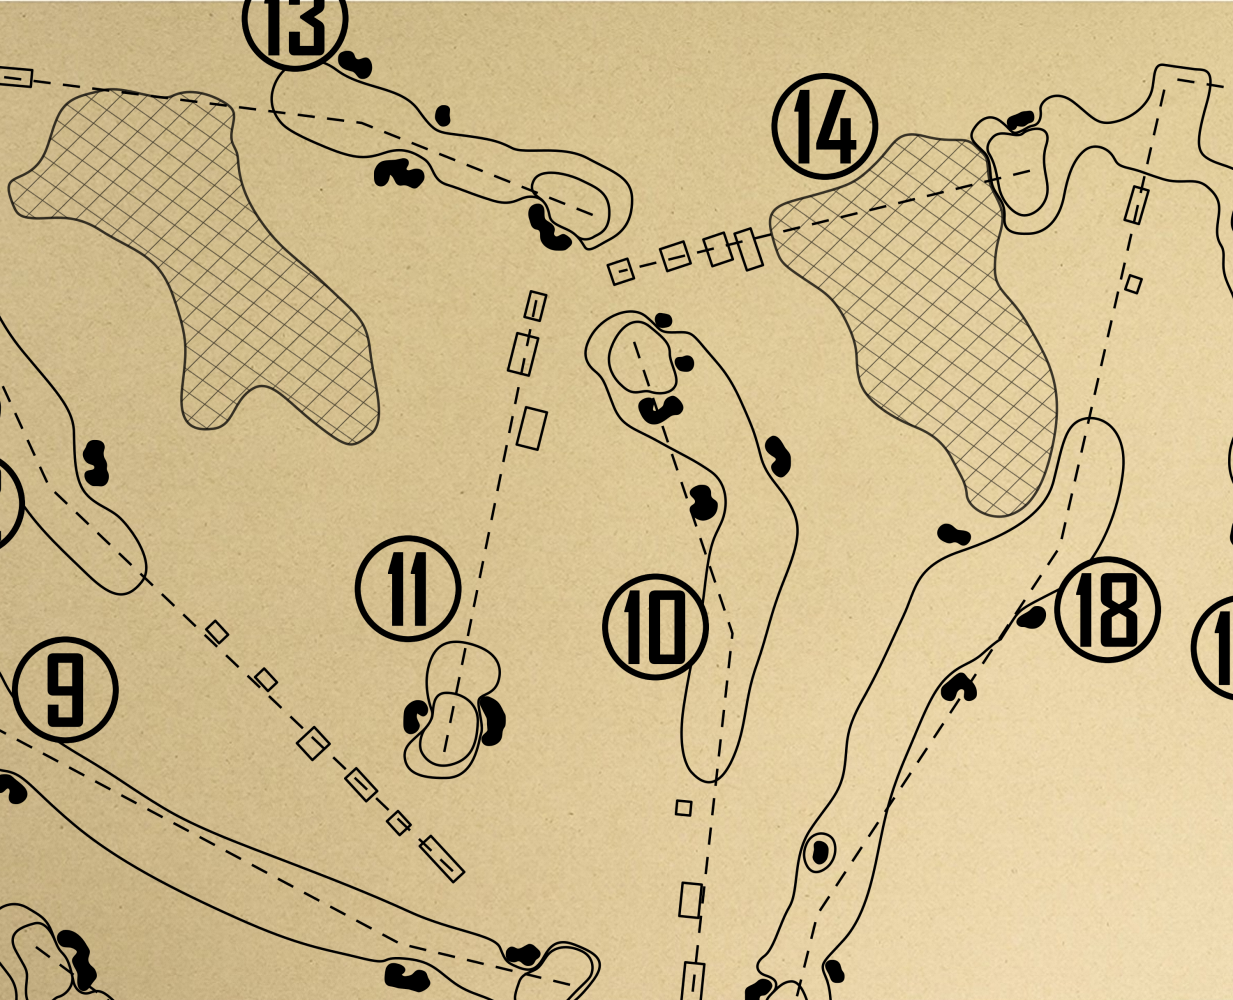 Cherokee Town & Country Club North Course Outline (Print)